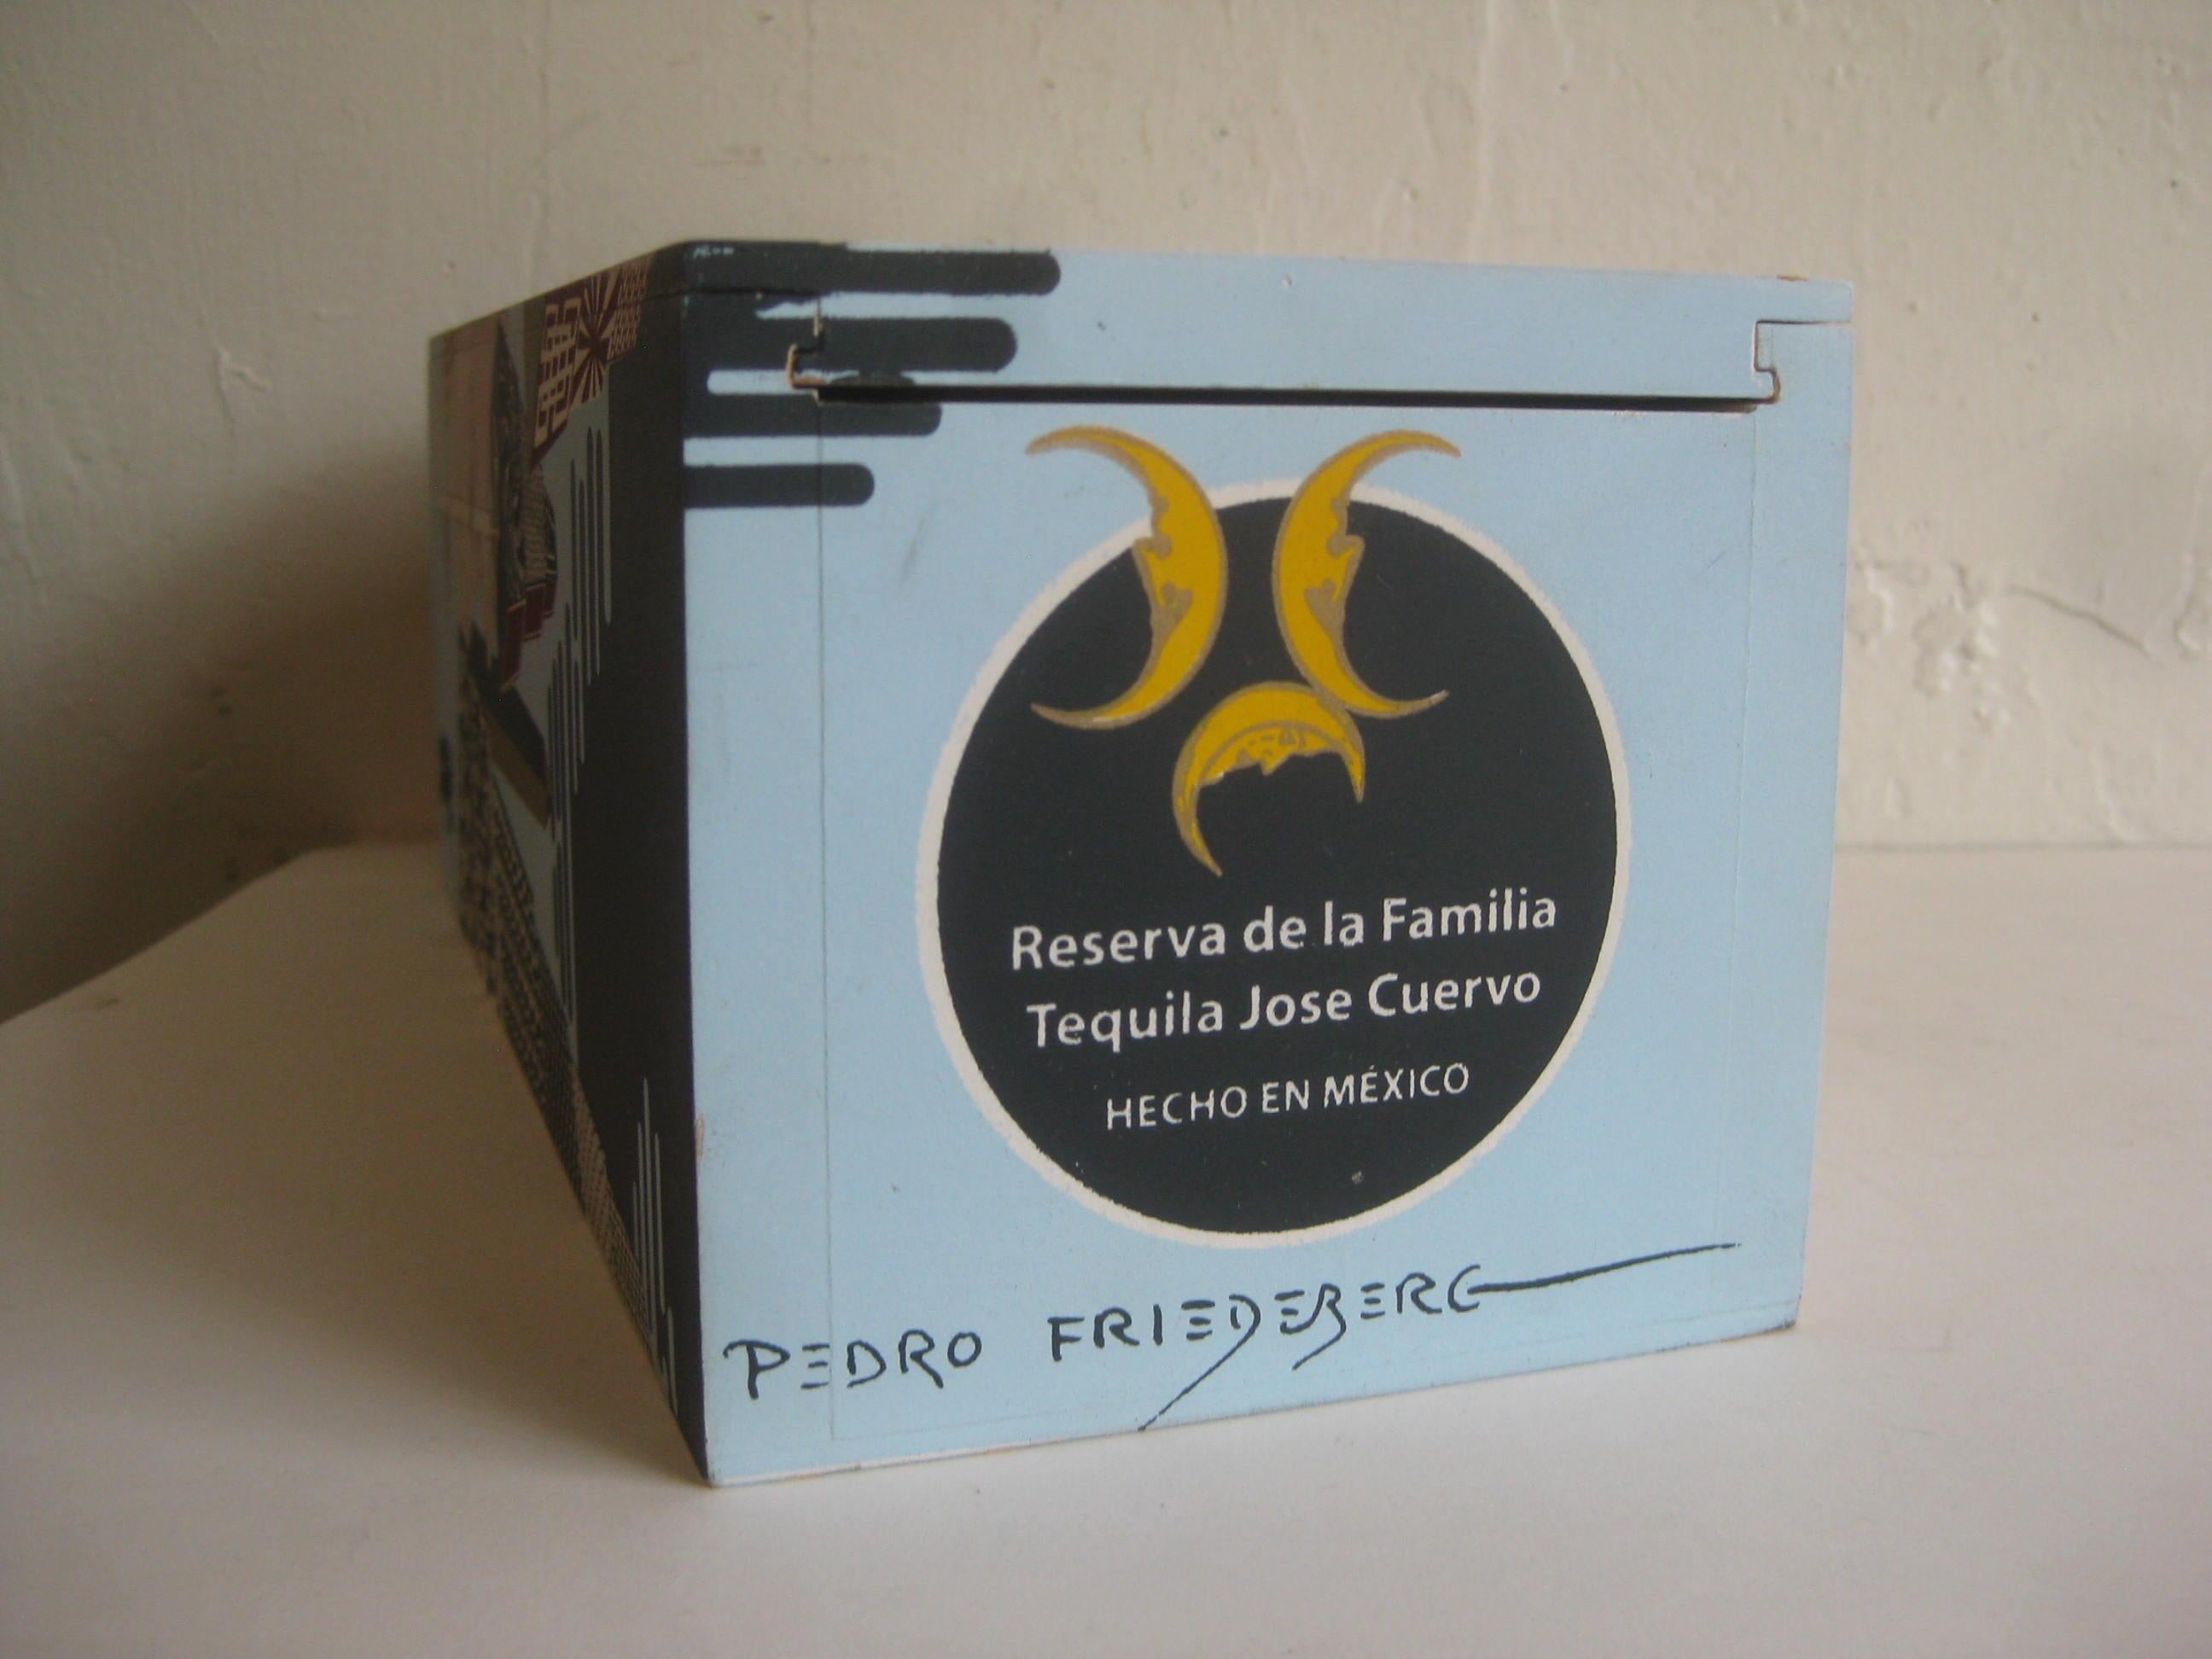 2007 Pedro Friedberg Art Mexican Modernist Silk Screened Wood Tequila Box For Sale 5